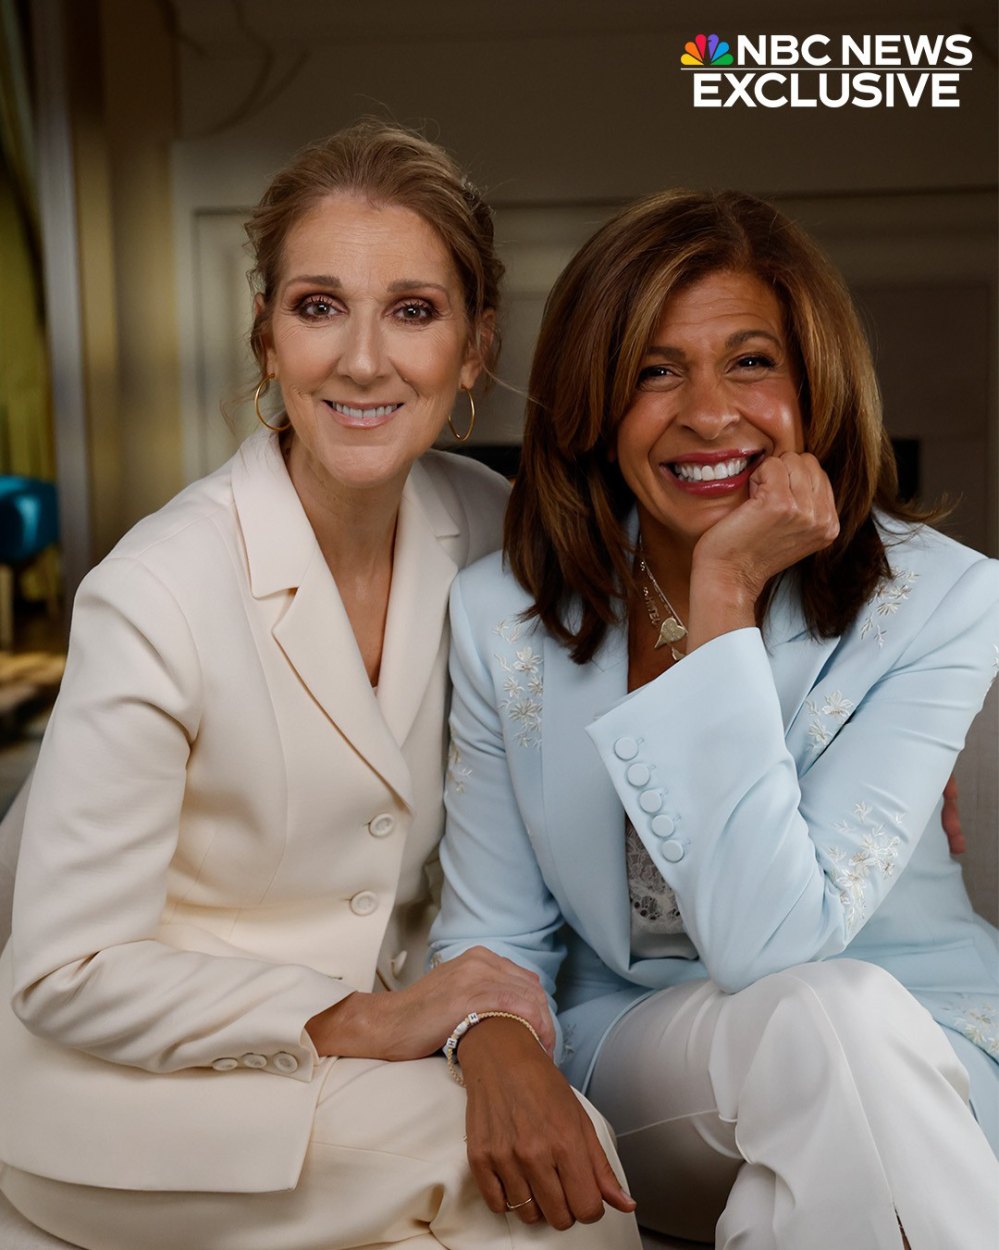 Hoda Kotb Teases Her 'Rare' and 'Amazing' Interview With Celine Dion